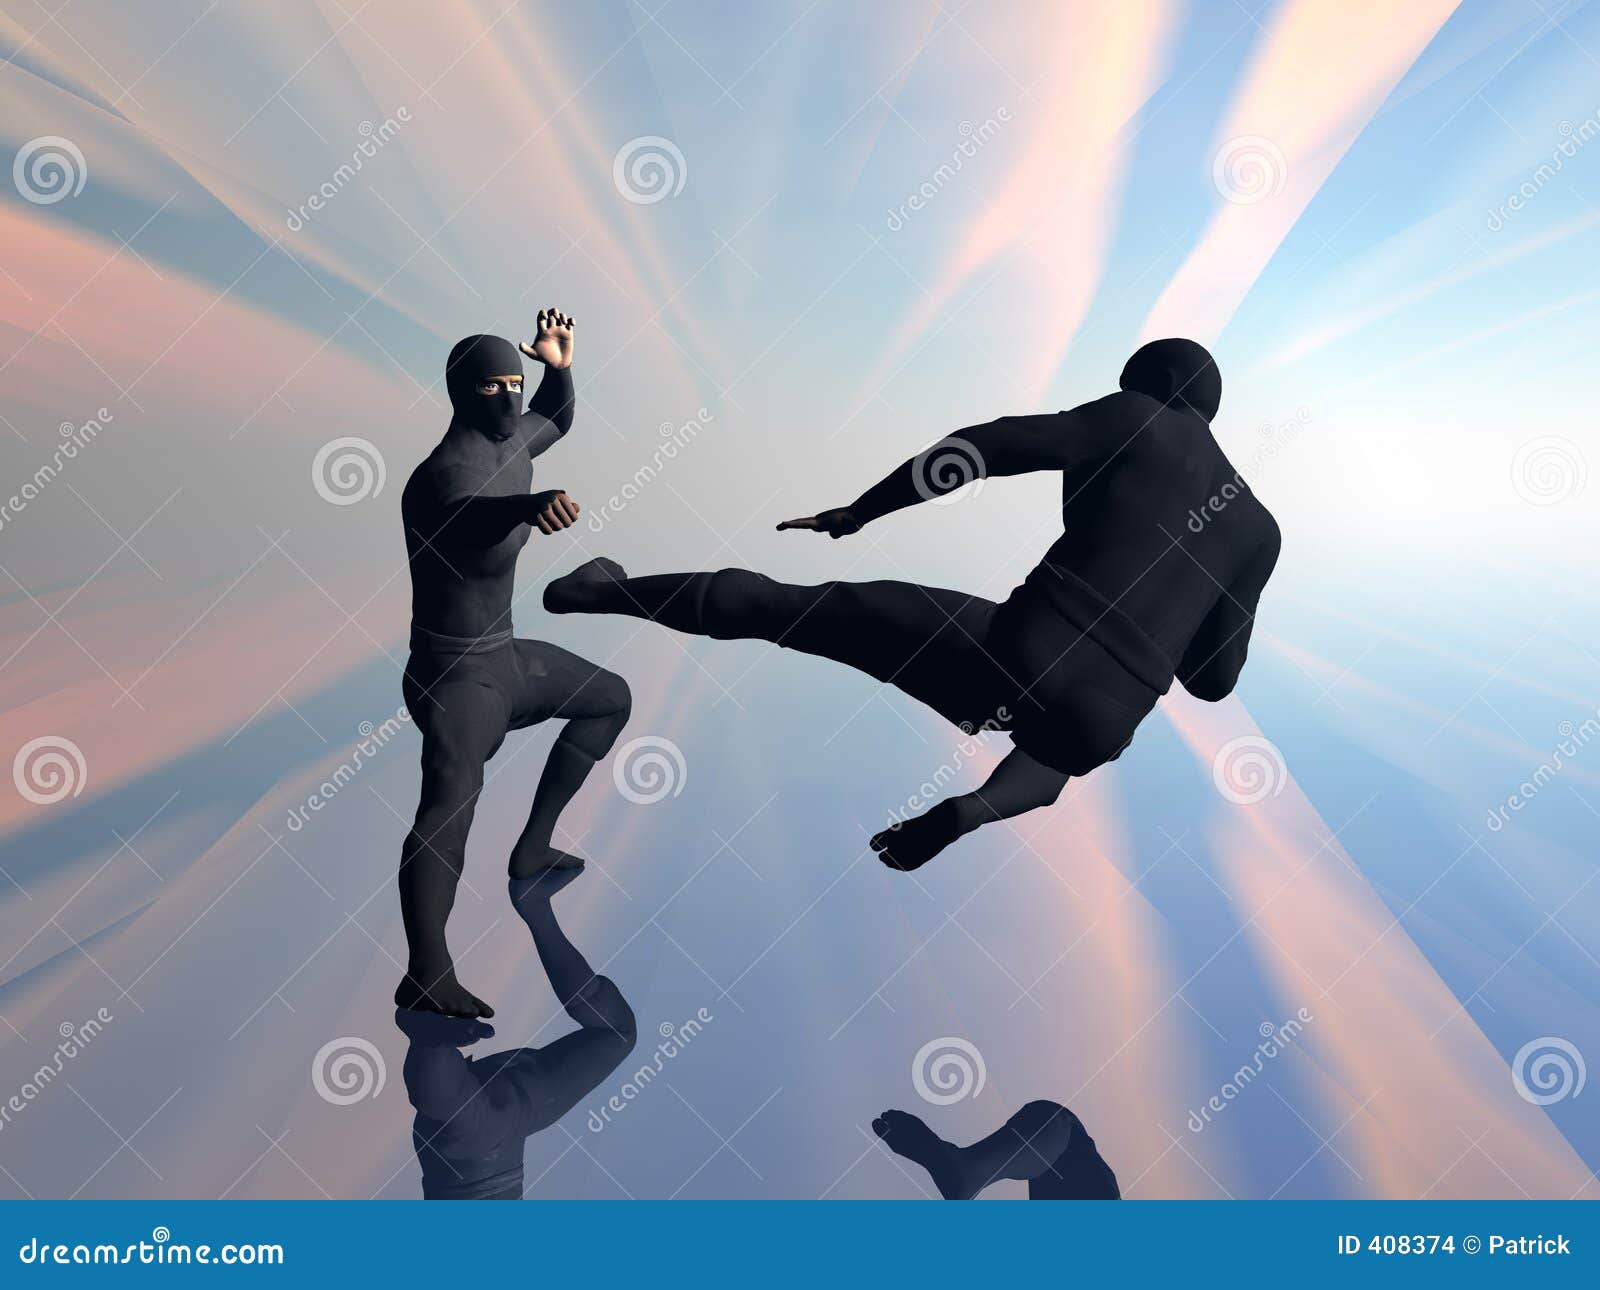 Two Ninja In Fight 2. Stock Images - Image: 408374